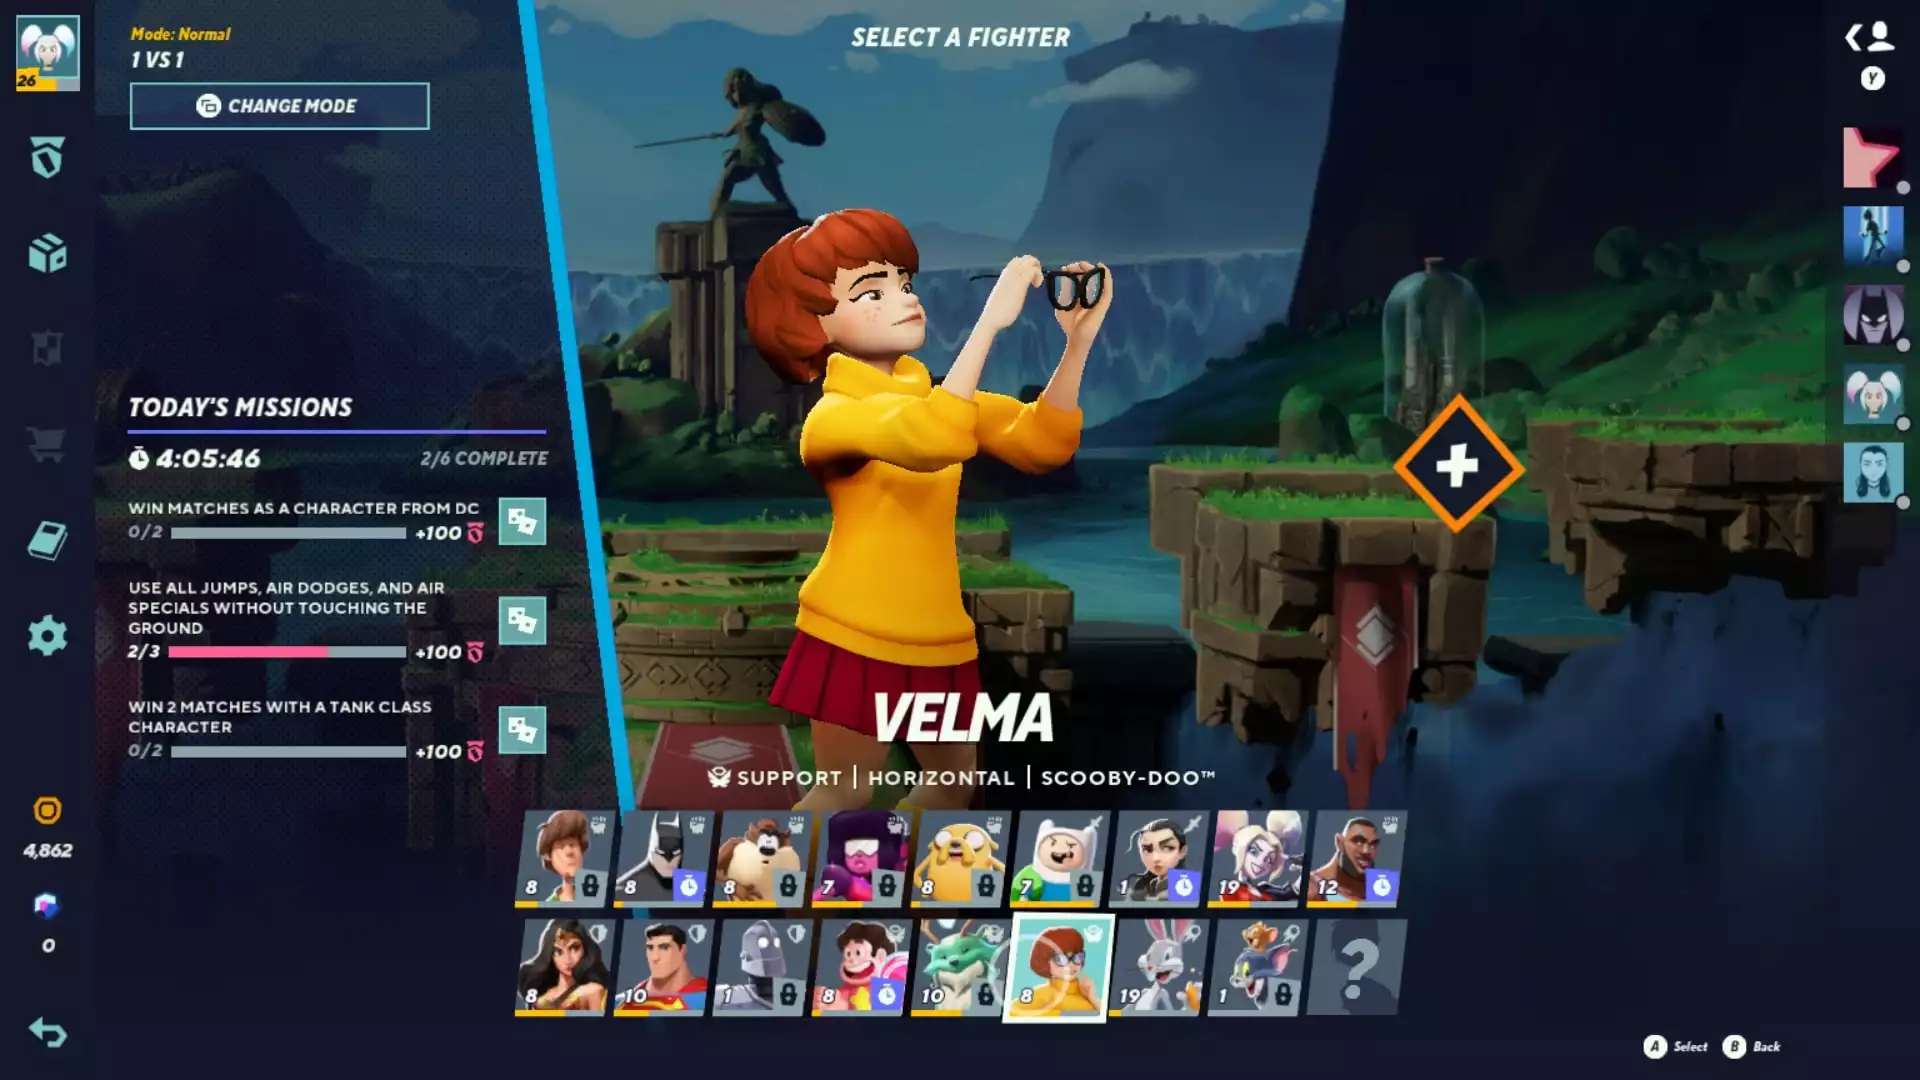 MultiVersus Velma Guide: Combos, Perks, Specials, And More